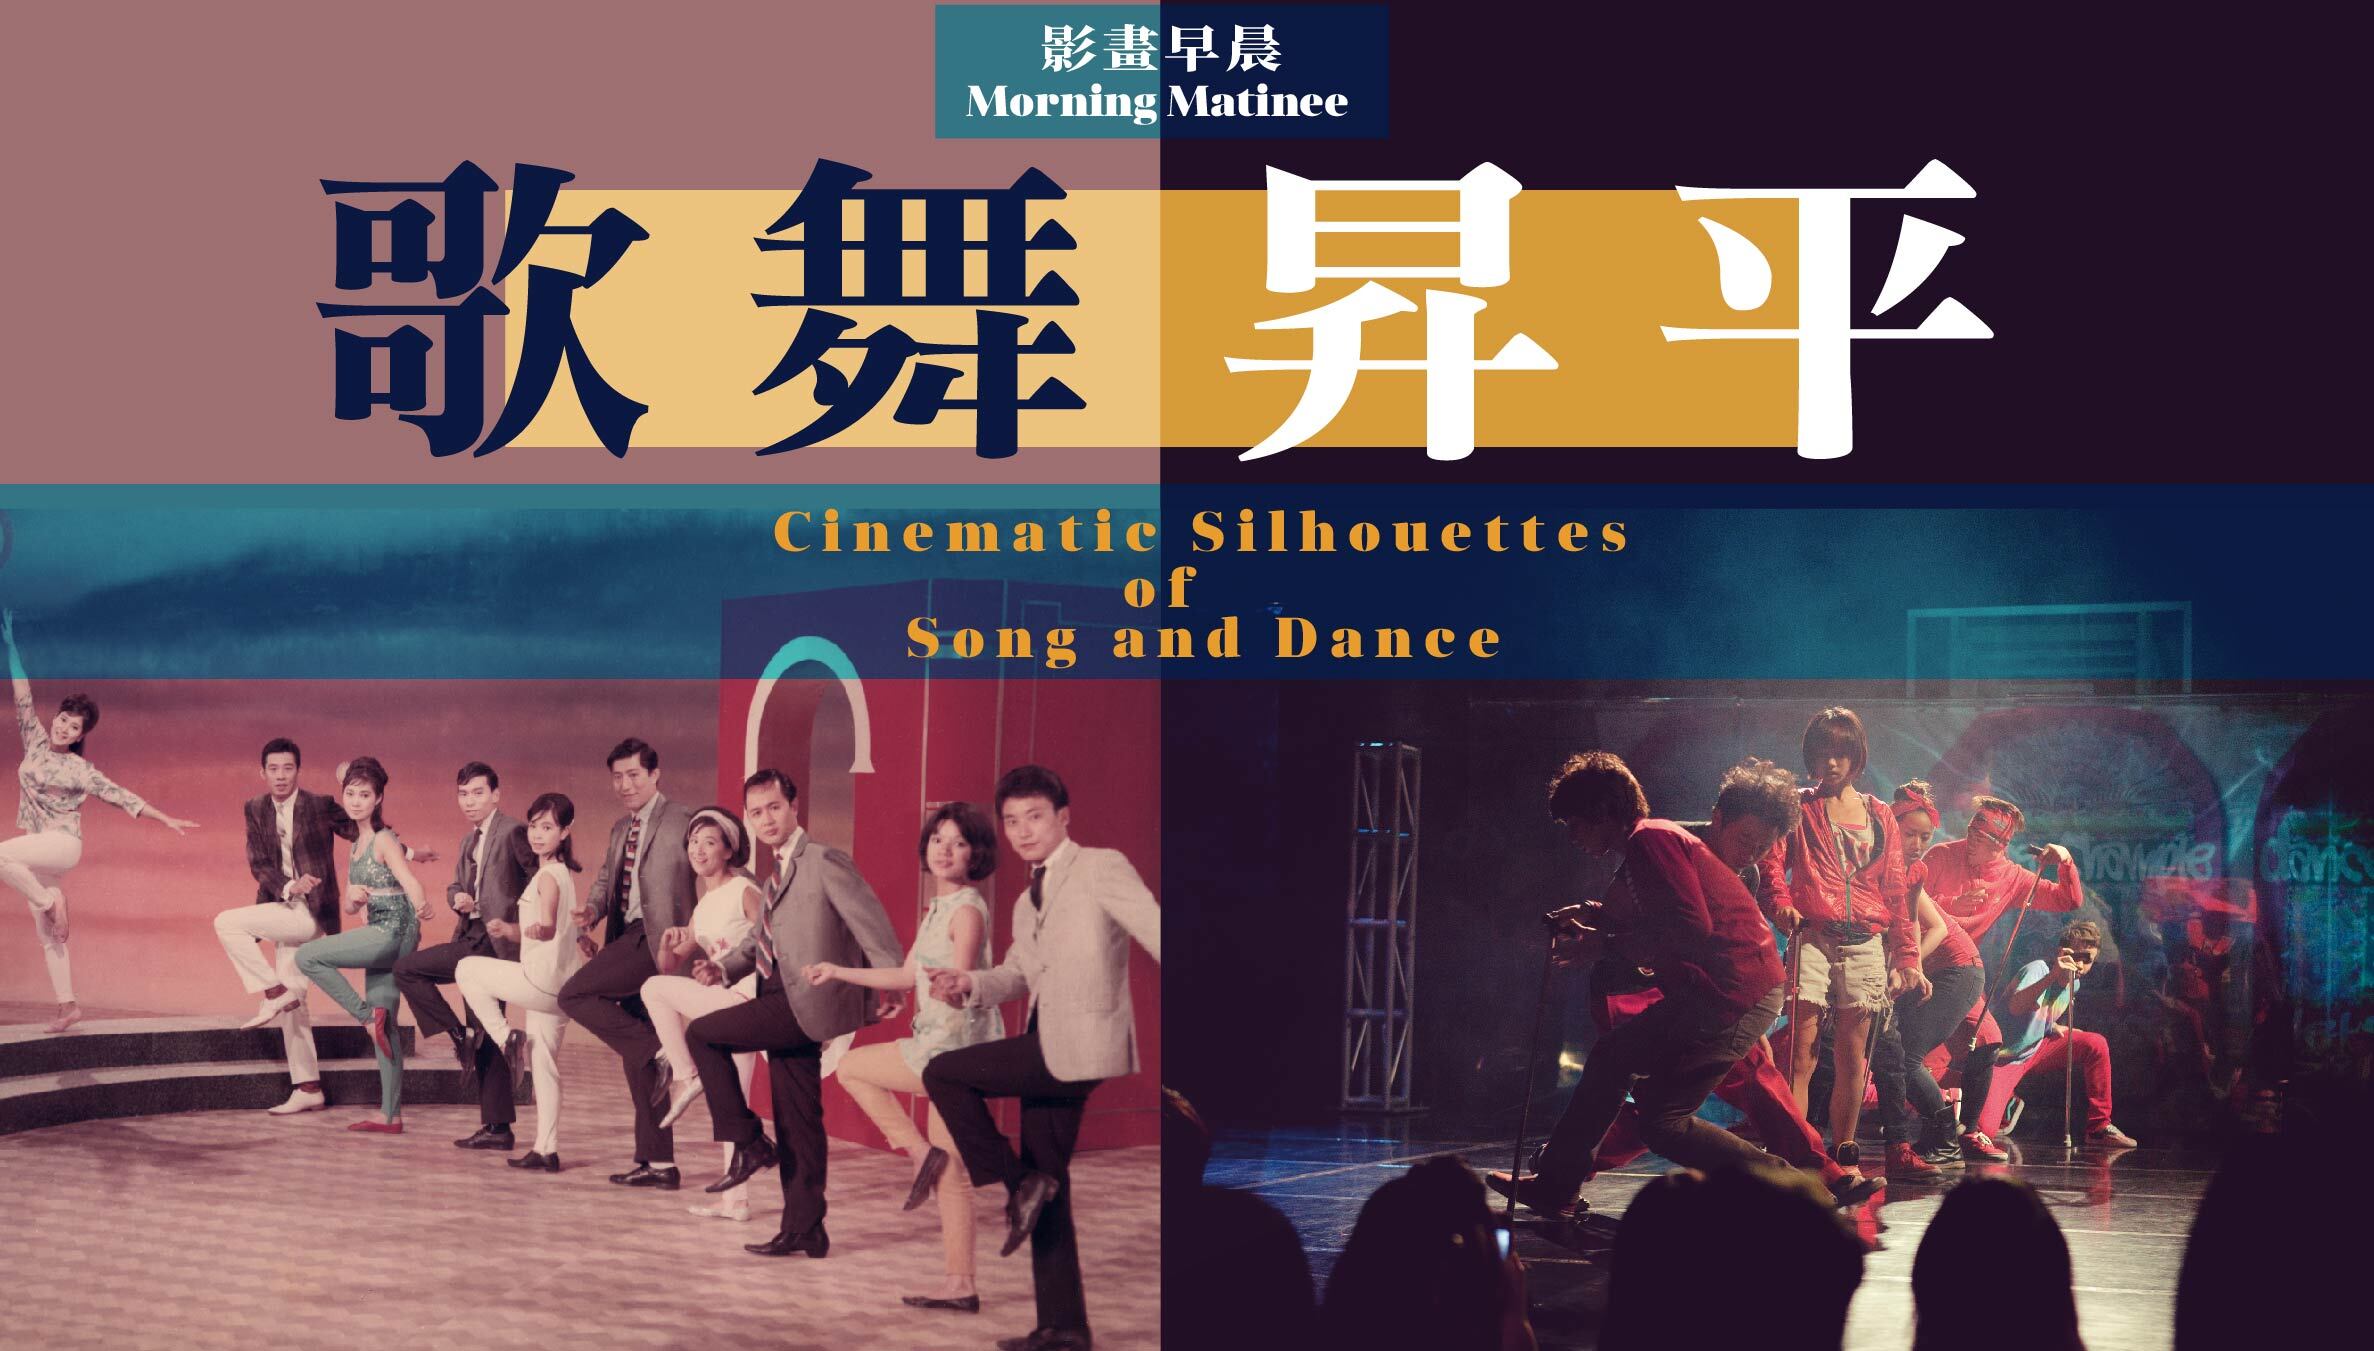 Morning Matinee – Cinematic Silhouettes of Song and Dance (Screening)(27/1/2023 - 2/6/2023)